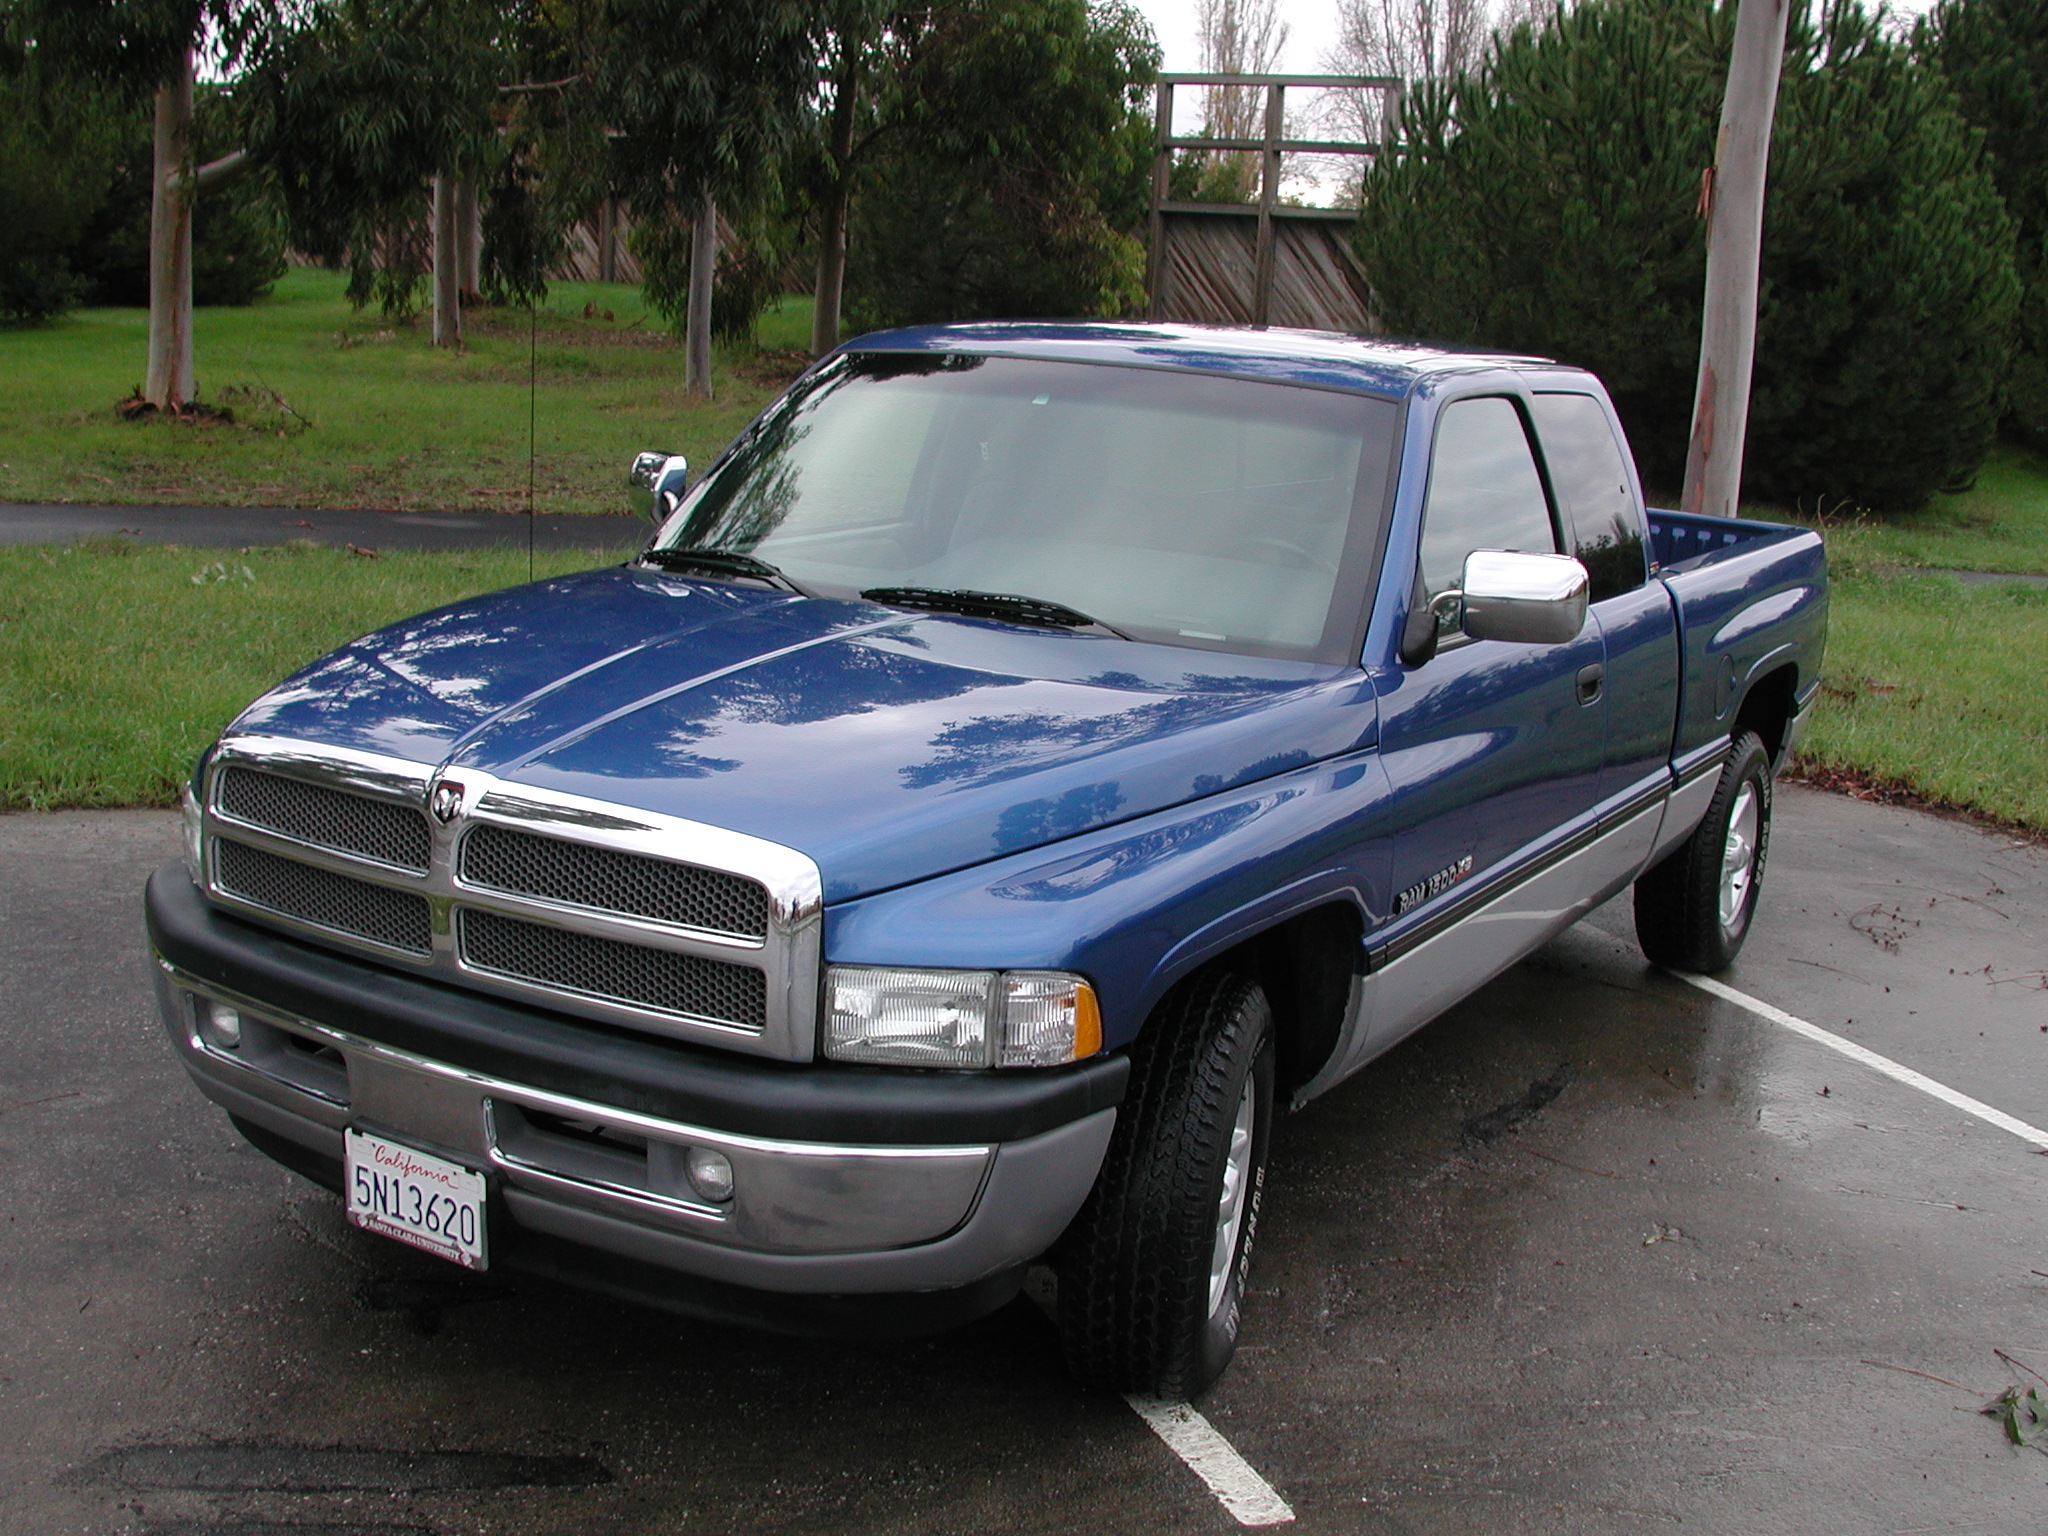 a blue dodge ram truck parked in a parking lot